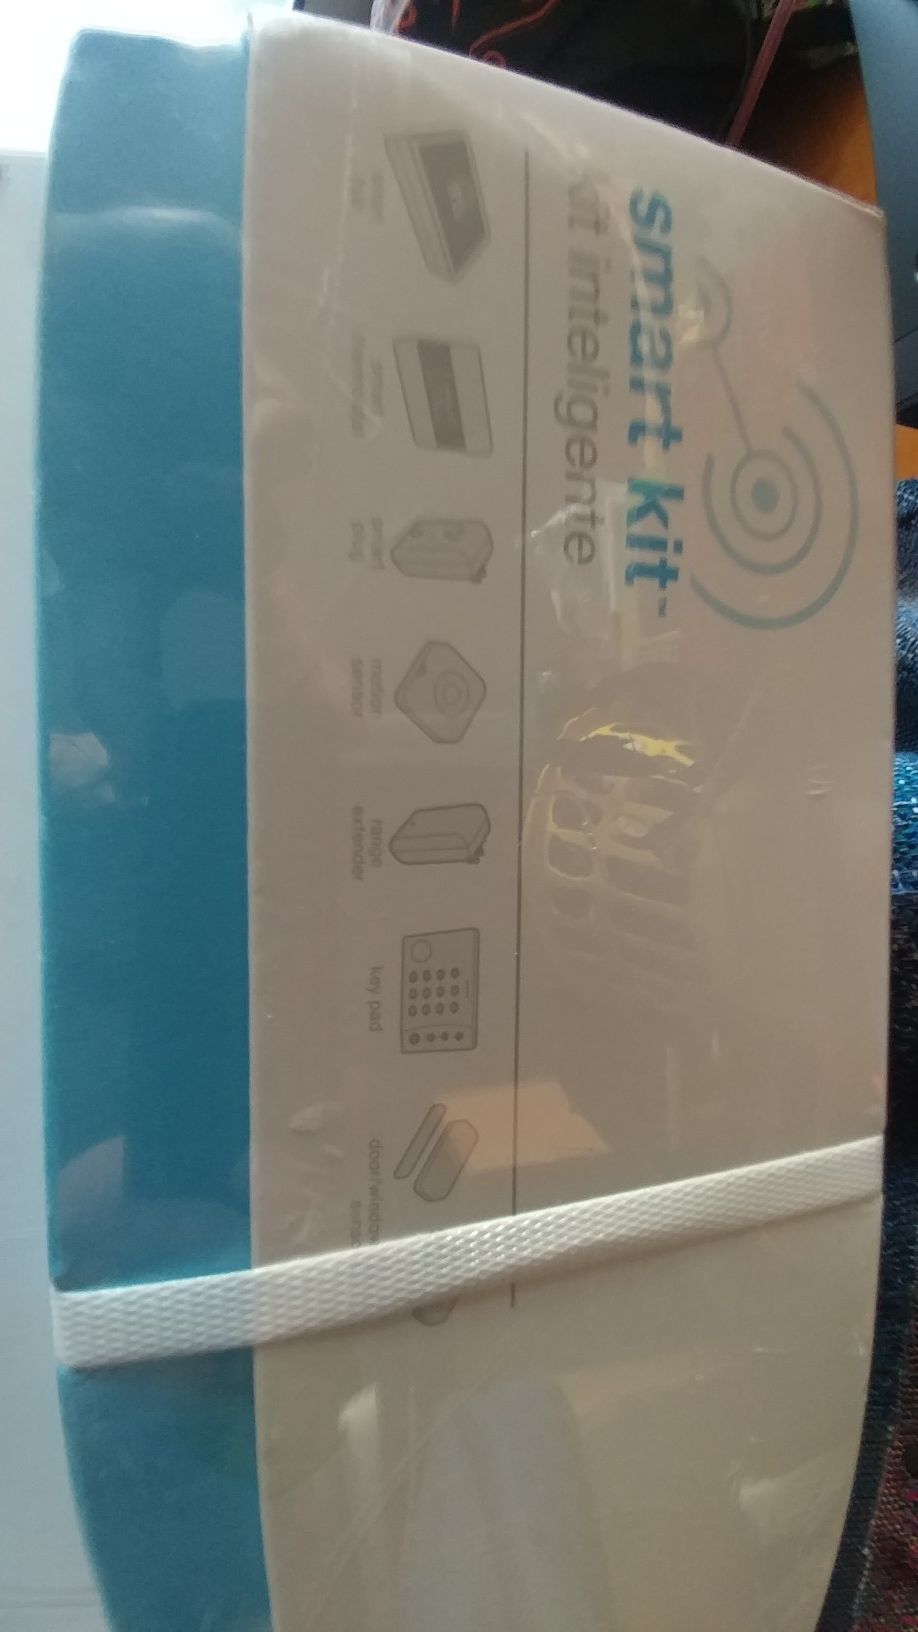 Smart kit Security kit for home /Brand New